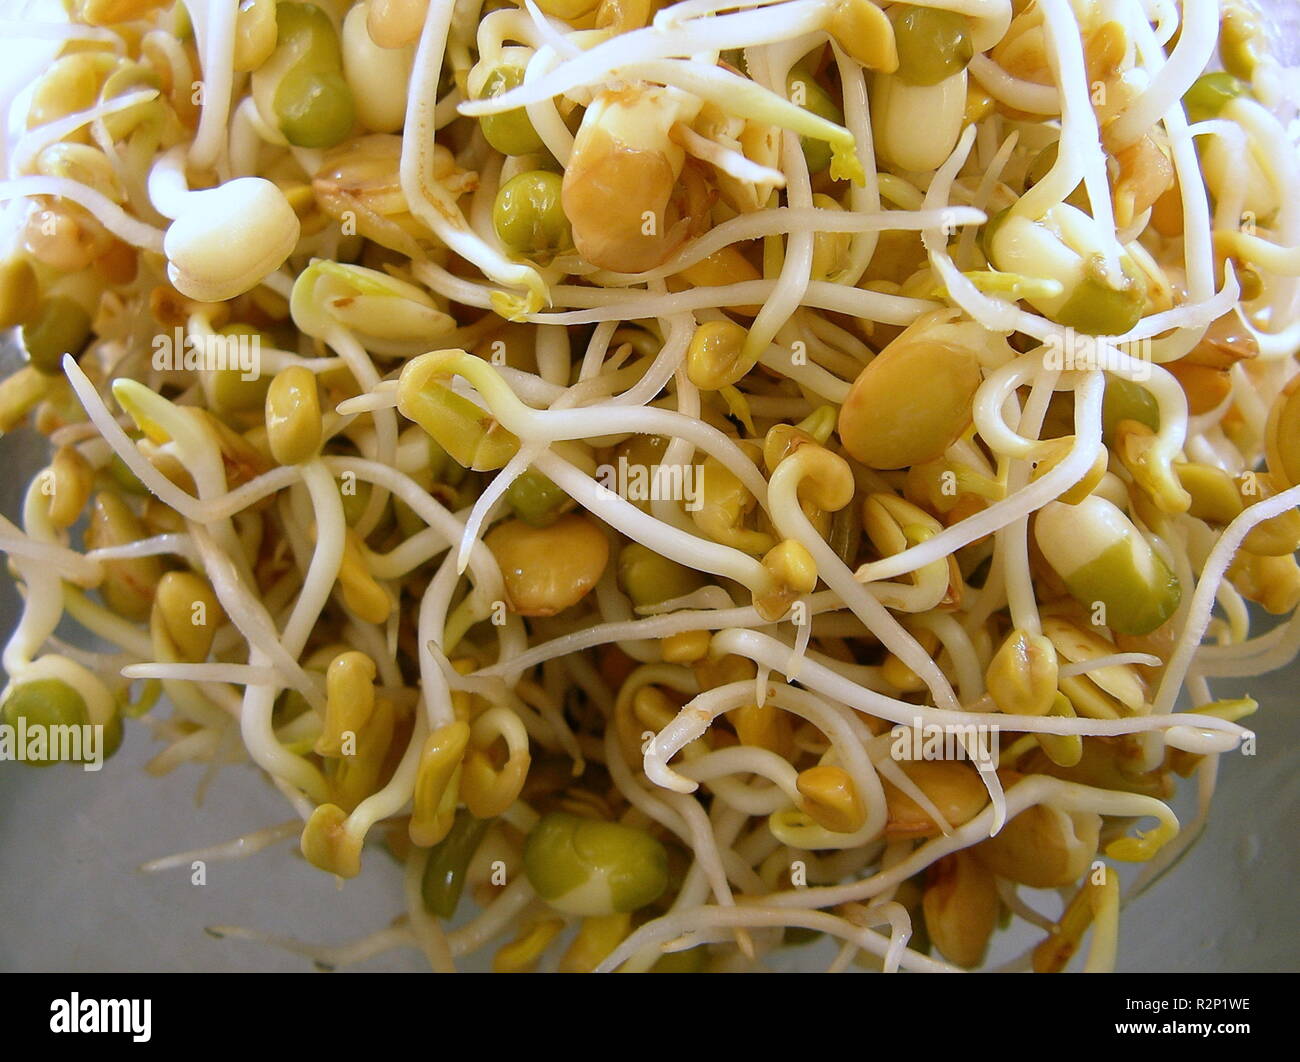 ready-sprouts Stock Photo